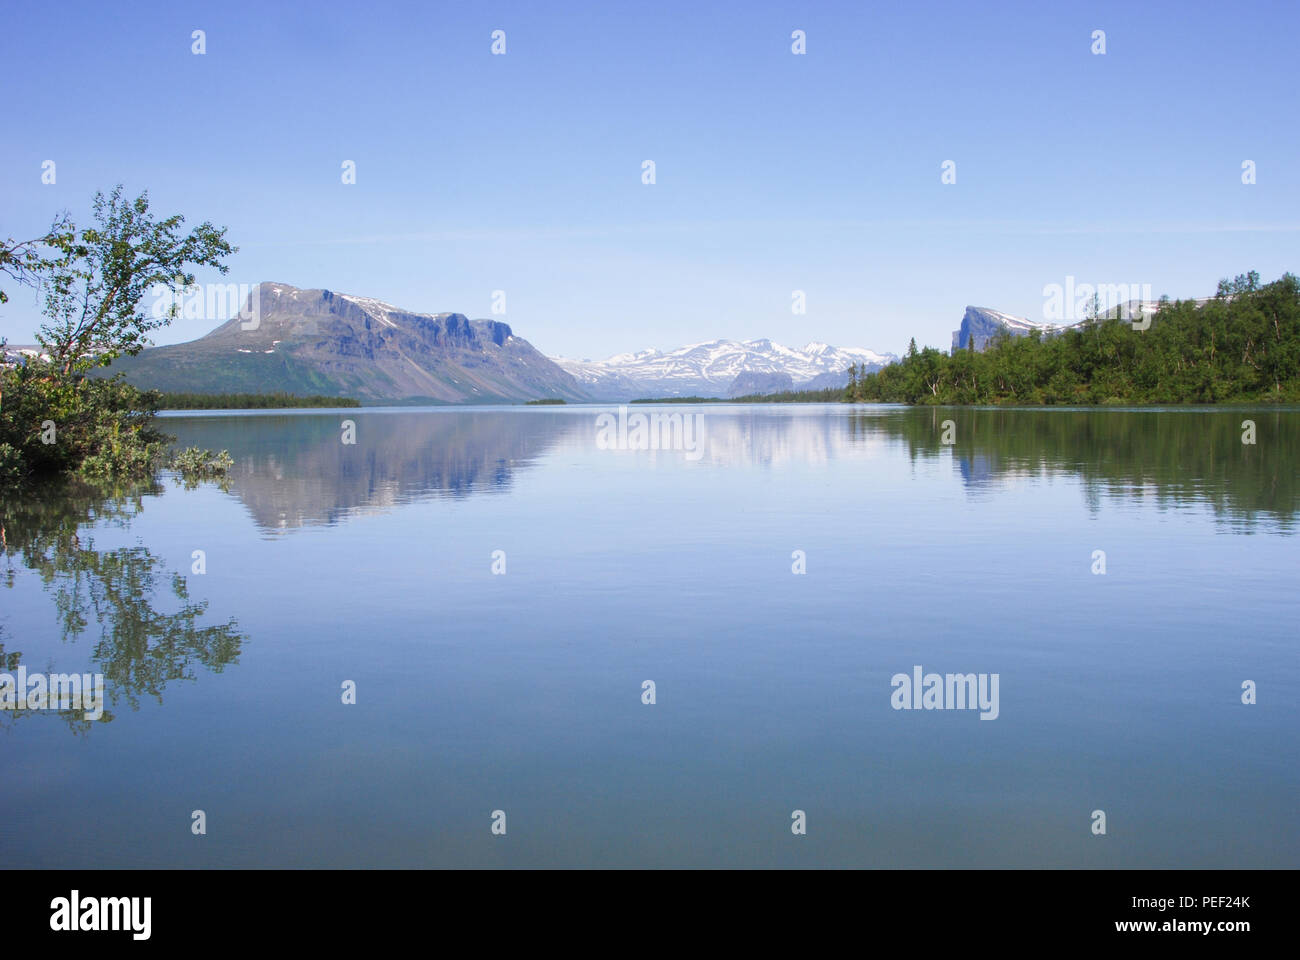 The beauty of Laponia Wilderness - Lake Laitaure Water Reflections. Stock Photo